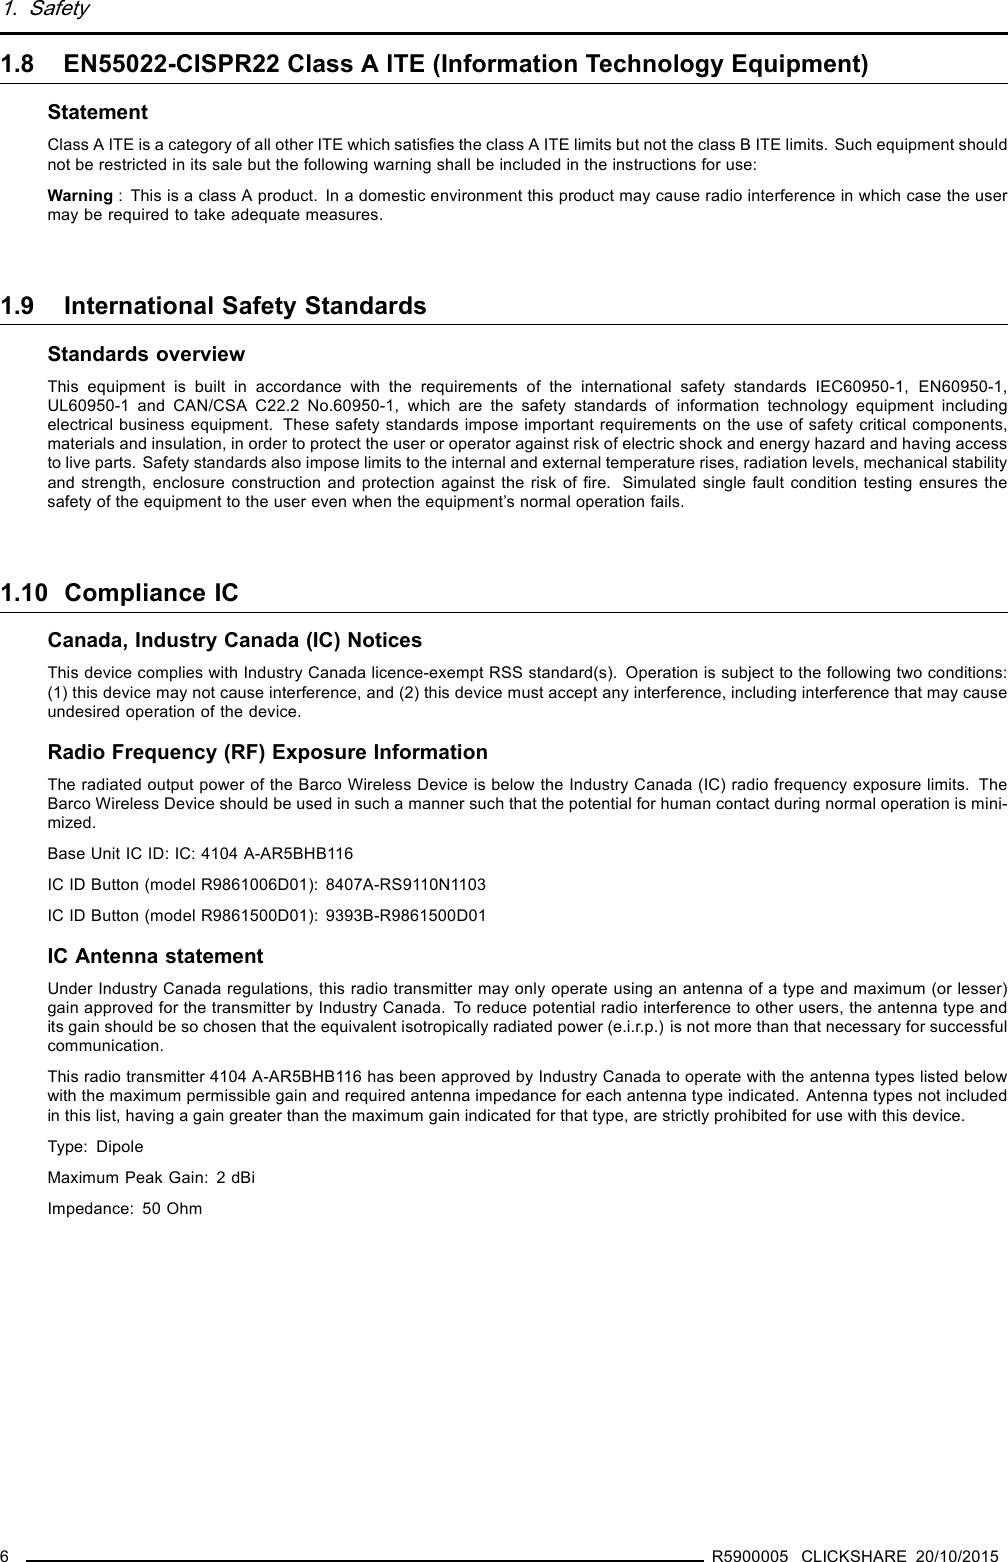 1. Safety1.8 EN55022-CISPR22 Class A ITE (Information Technology Equipment)StatementClass A ITE is a category of all other ITE which satisﬁes the class A ITE limits but not the class B ITE limits. Such equipment shouldnot be restricted in its sale but the following warning shall be included in the instructions for use:Warning : This is a class A product. In a domestic environment this product may cause radio interference in which case the usermay be required to take adequate measures.1.9 International Safety StandardsStandards overviewThis equipment is built in accordance with the requirements of the international safety standards IEC60950-1, EN60950-1,UL60950-1 and CAN/CSA C22.2 No.60950-1, which are the safety standards of information technology equipment includingelectrical business equipment. These safety standards impose important requirements on the use of safety critical components,materials and insulation, in order to protect the user or operator against risk of electric shock and energy hazard and having accessto live parts. Safety standards also impose limits to the internal and external temperature rises, radiation levels, mechanical stabilityand strength, enclosure construction and protection against the risk of ﬁre. Simulated single fault condition testing ensures thesafety of the equipment to the user even when the equipment’s normal operation fails.1.10 Compliance ICCanada, Industry Canada (IC) NoticesThis device complies with Industry Canada licence-exempt RSS standard(s). Operation is subject to the following two conditions:(1) this device may not cause interference, and (2) this device must accept any interference, including interference that may causeundesired operation of the device.Radio Frequency (RF) Exposure InformationThe radiated output power of the Barco Wireless Device is below the Industry Canada (IC) radio frequency exposure limits. TheBarco Wireless Device should be used in such a manner such that the potential for human contact during normal operation is mini-mized.Base Unit IC ID: IC: 4104 A-AR5BHB116IC ID Button (model R9861006D01): 8407A-RS9110N1103IC ID Button (model R9861500D01): 9393B-R9861500D01IC Antenna statementUnder Industry Canada regulations, this radio transmitter may only operate using an antenna of a type and maximum (or lesser)gain approved for the transmitter by Industry Canada. To reduce potential radio interference to other users, the antenna type andits gain should be so chosen that the equivalent isotropically radiated power (e.i.r.p.) is not more than that necessary for successfulcommunication.This radio transmitter 4104 A-AR5BHB116 has been approved by Industry Canada to operate with the antenna types listed belowwith the maximum permissible gain and required antenna impedance for each antenna type indicated. Antenna types not includedin this list, having a gain greater than the maximum gain indicated for that type, are strictly prohibited for use with this device.Type: DipoleMaximum Peak Gain: 2 dBiImpedance: 50 Ohm6R5900005 CLICKSHARE 20/10/2015